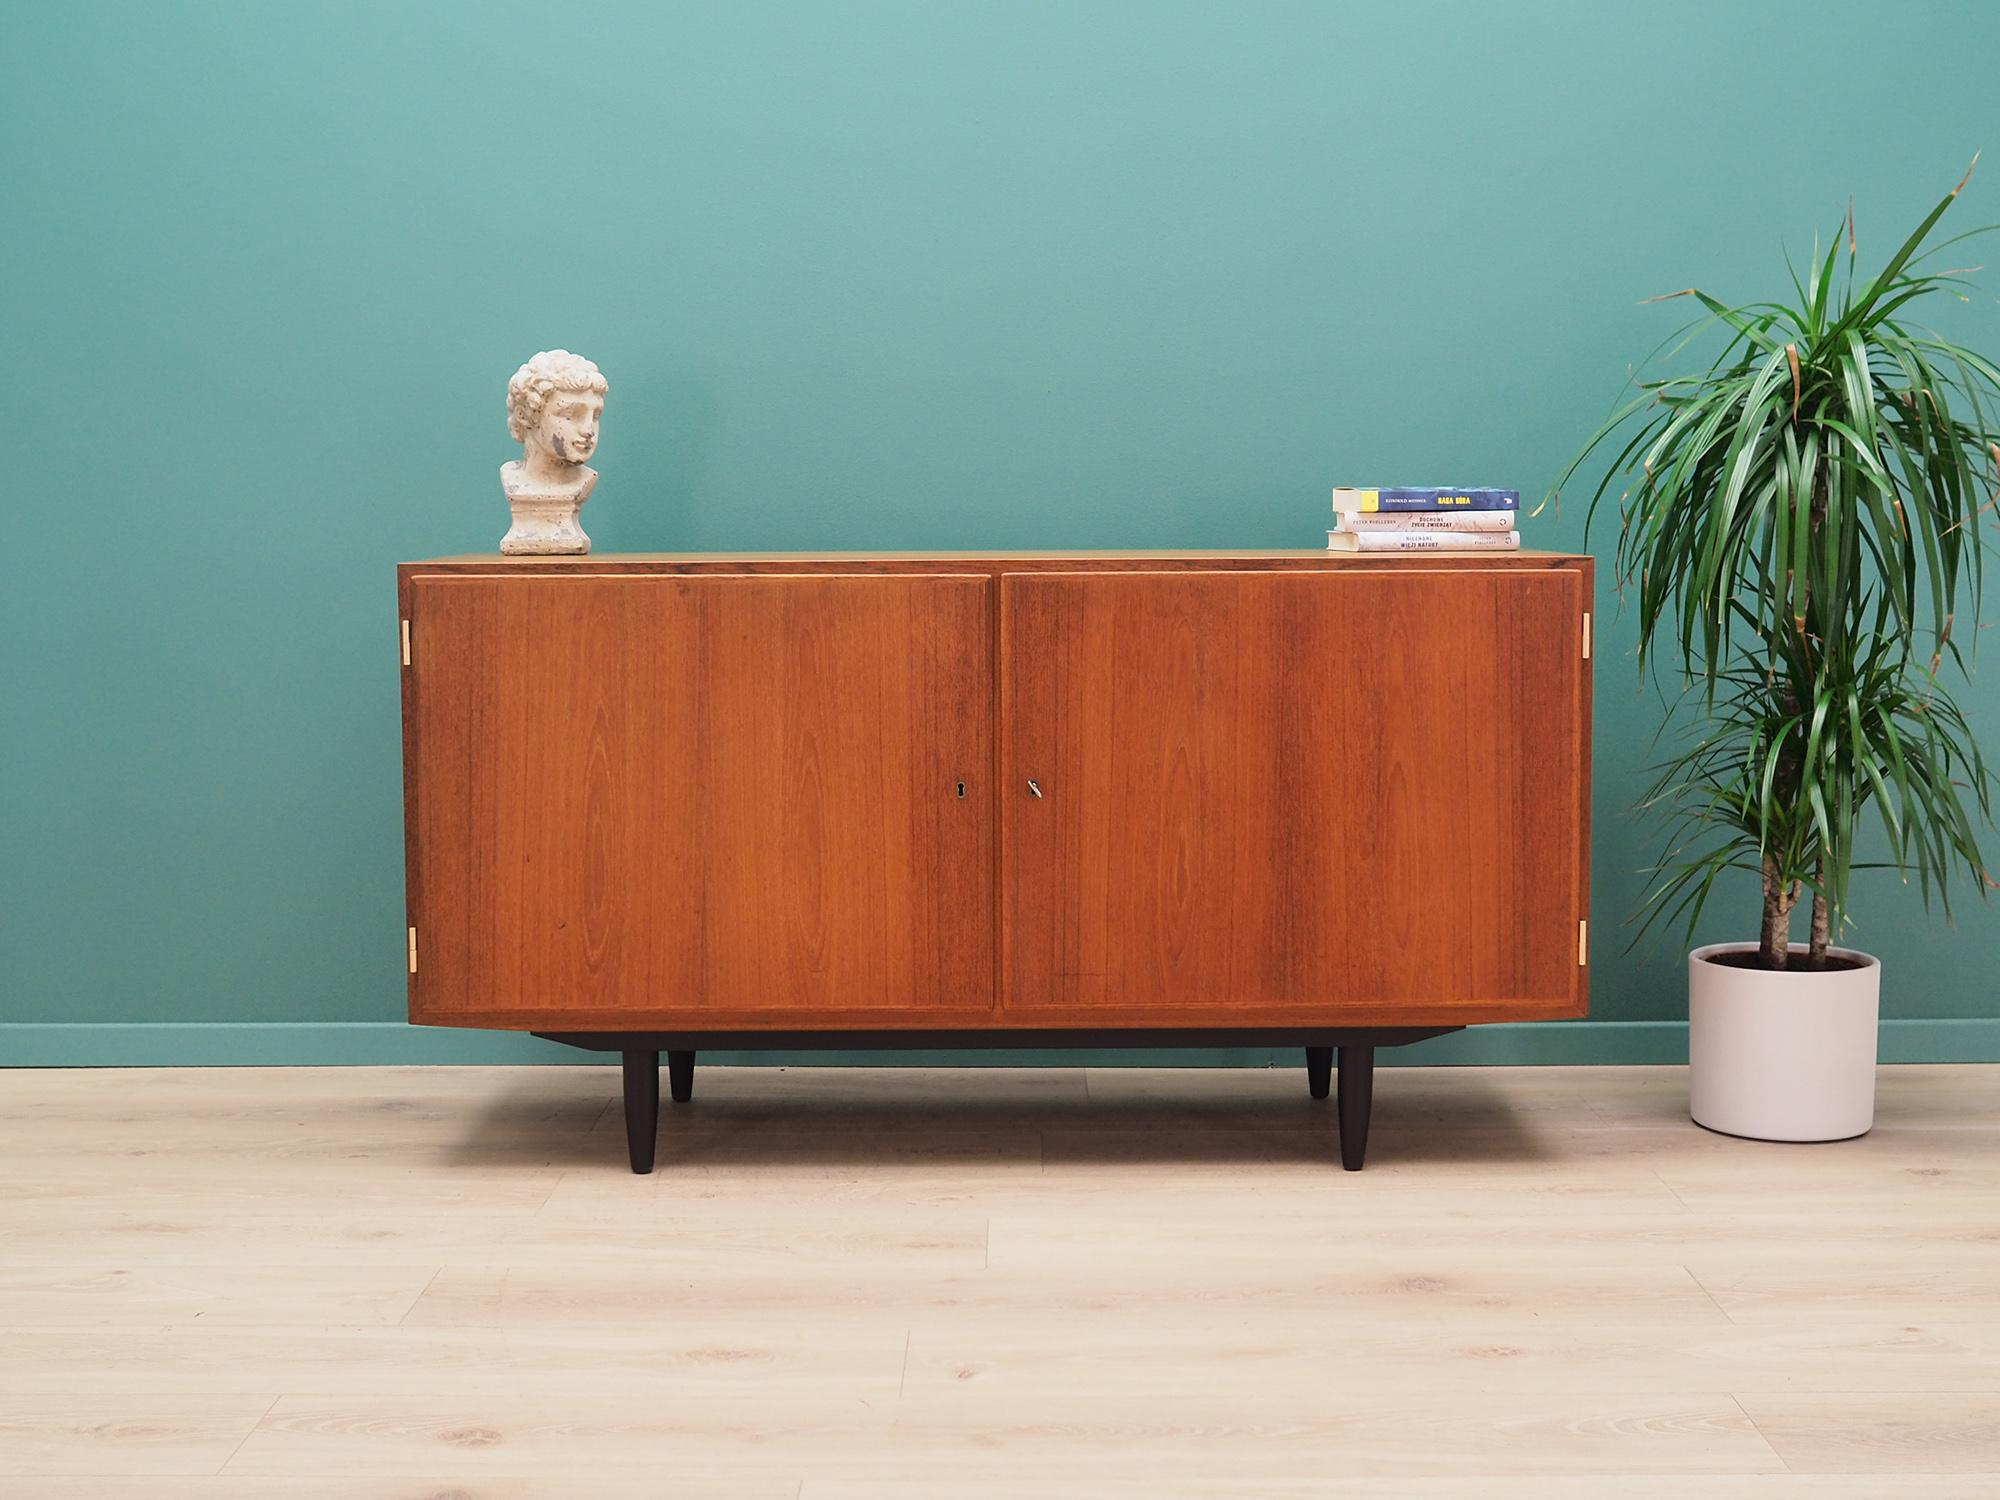 Fantastic cabinet from the 1960s-1970s. Minimalist form, Scandinavian design. The furniture is covered with teak veneer, legs are made of solid wood. Designed by Carlo Jensen, produced in the Hundevad workshop. The cabinet has three stylish drawers